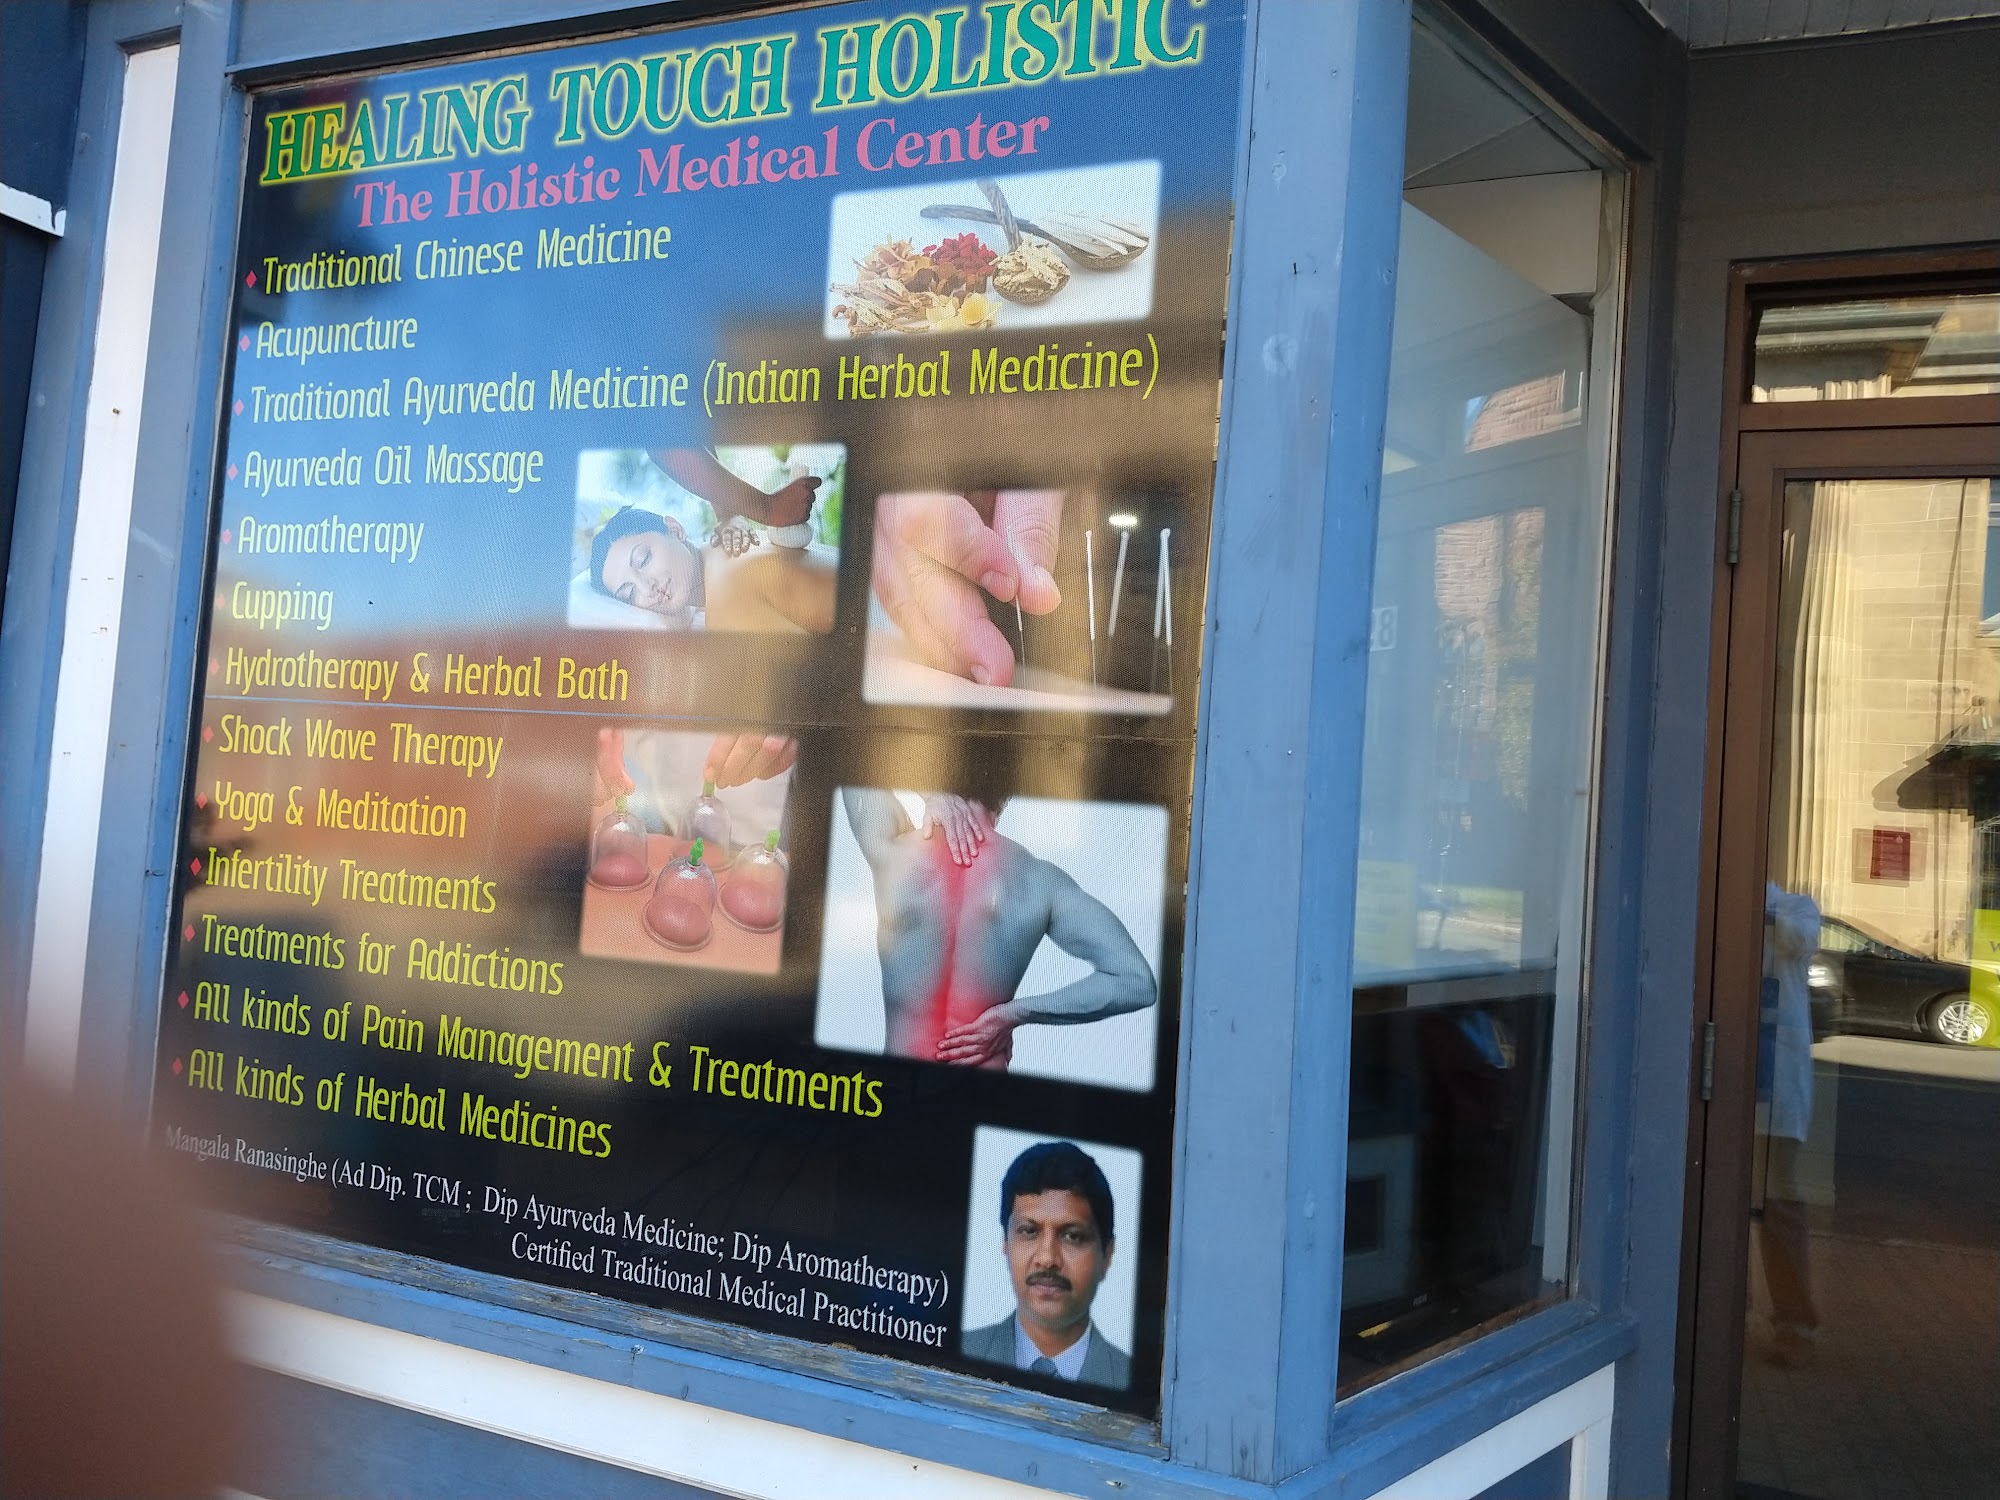 Healing Touch Holistic / Singhe Holdings & Services (Worldwide) Inc. 89 Victoria St E, Amherst Nova Scotia B4H 1X7